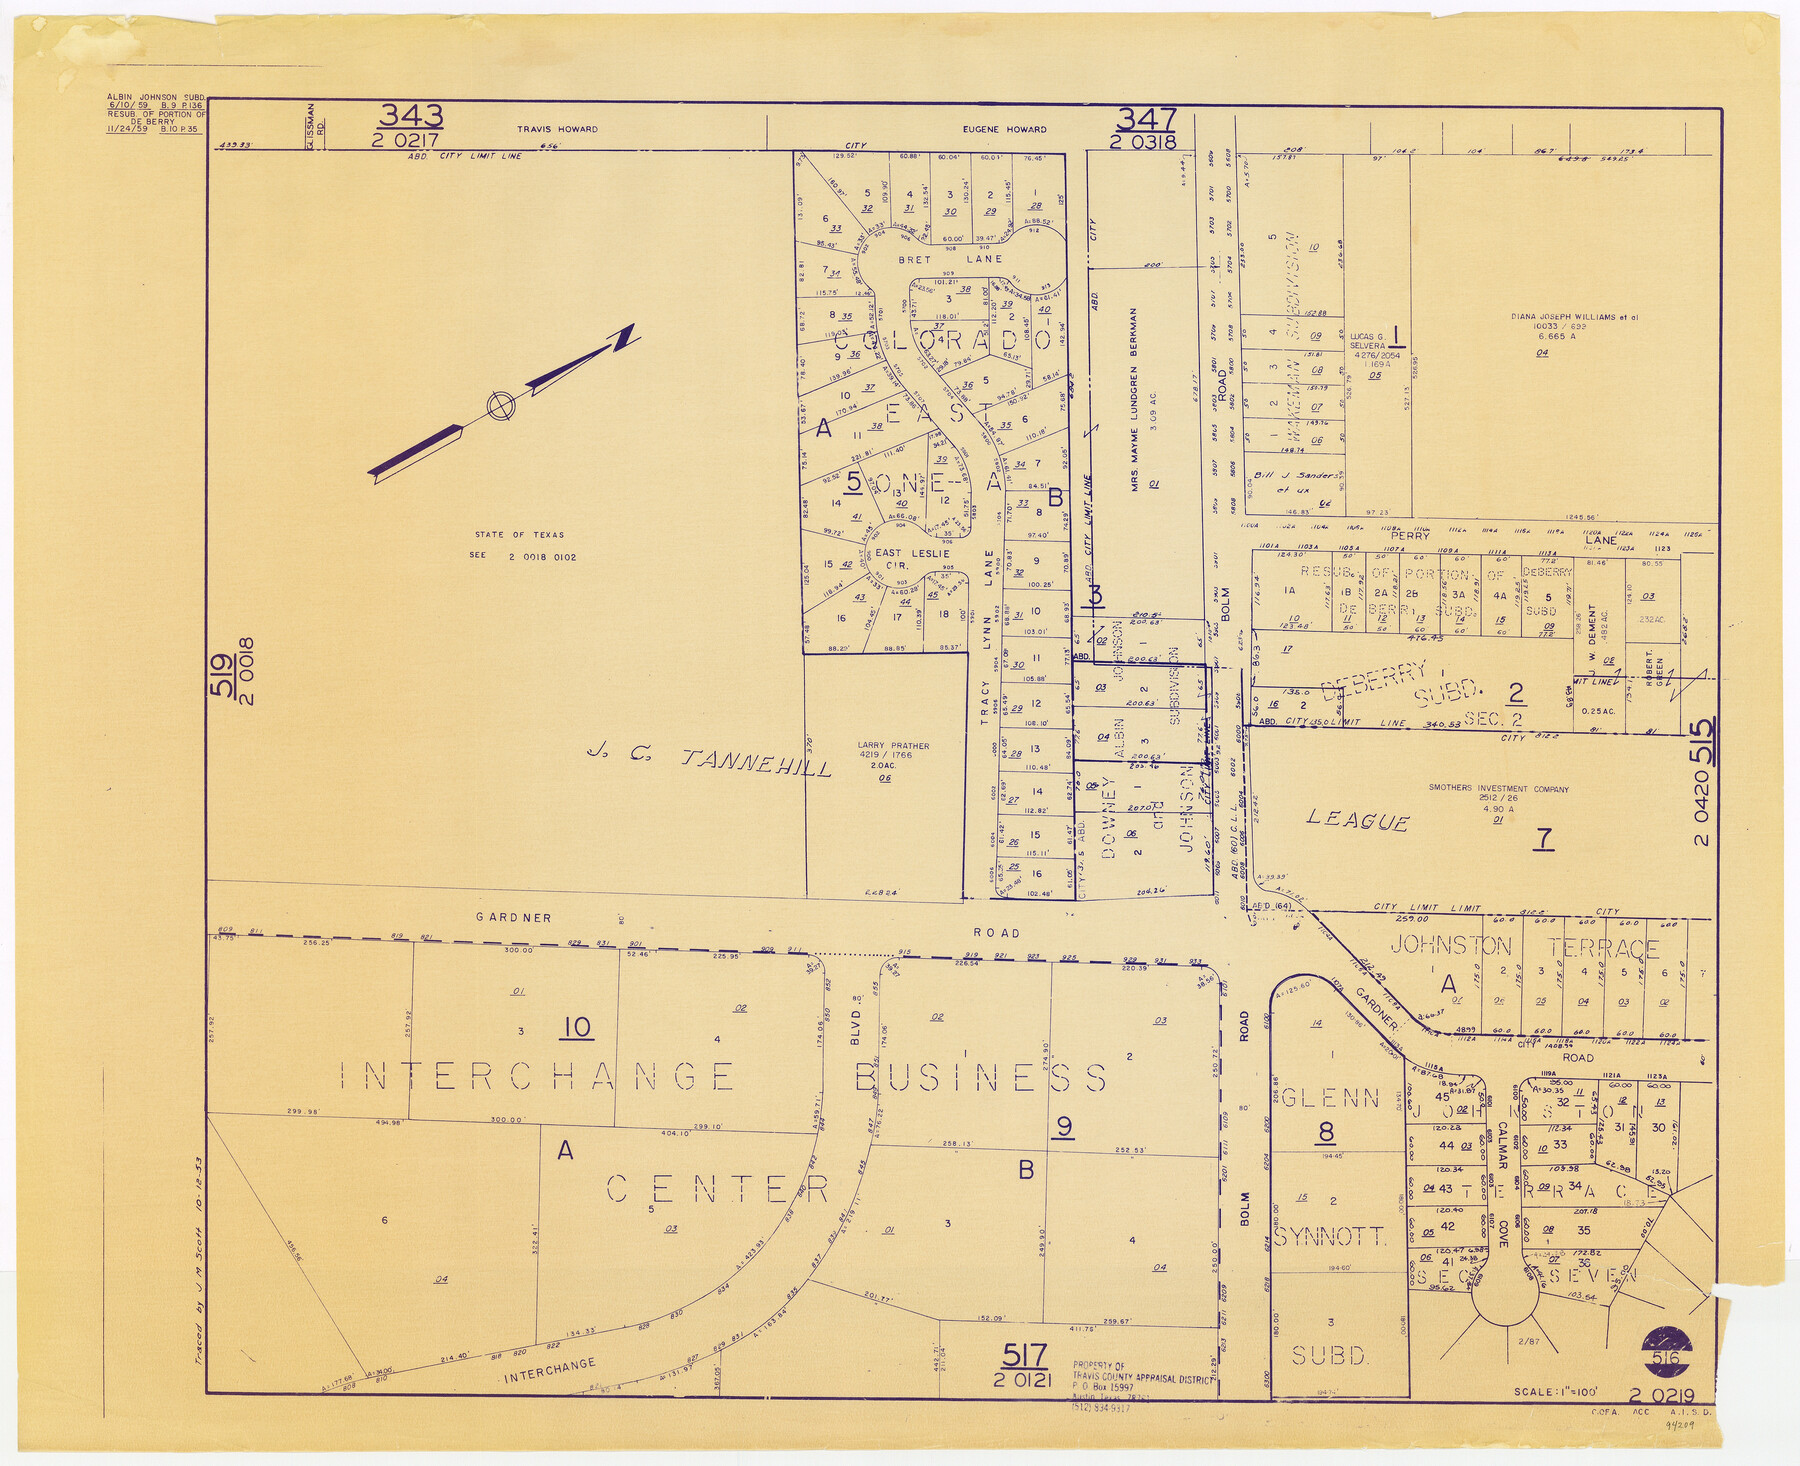 94209, Travis County Appraisal District Plat Map 2_0219, General Map Collection